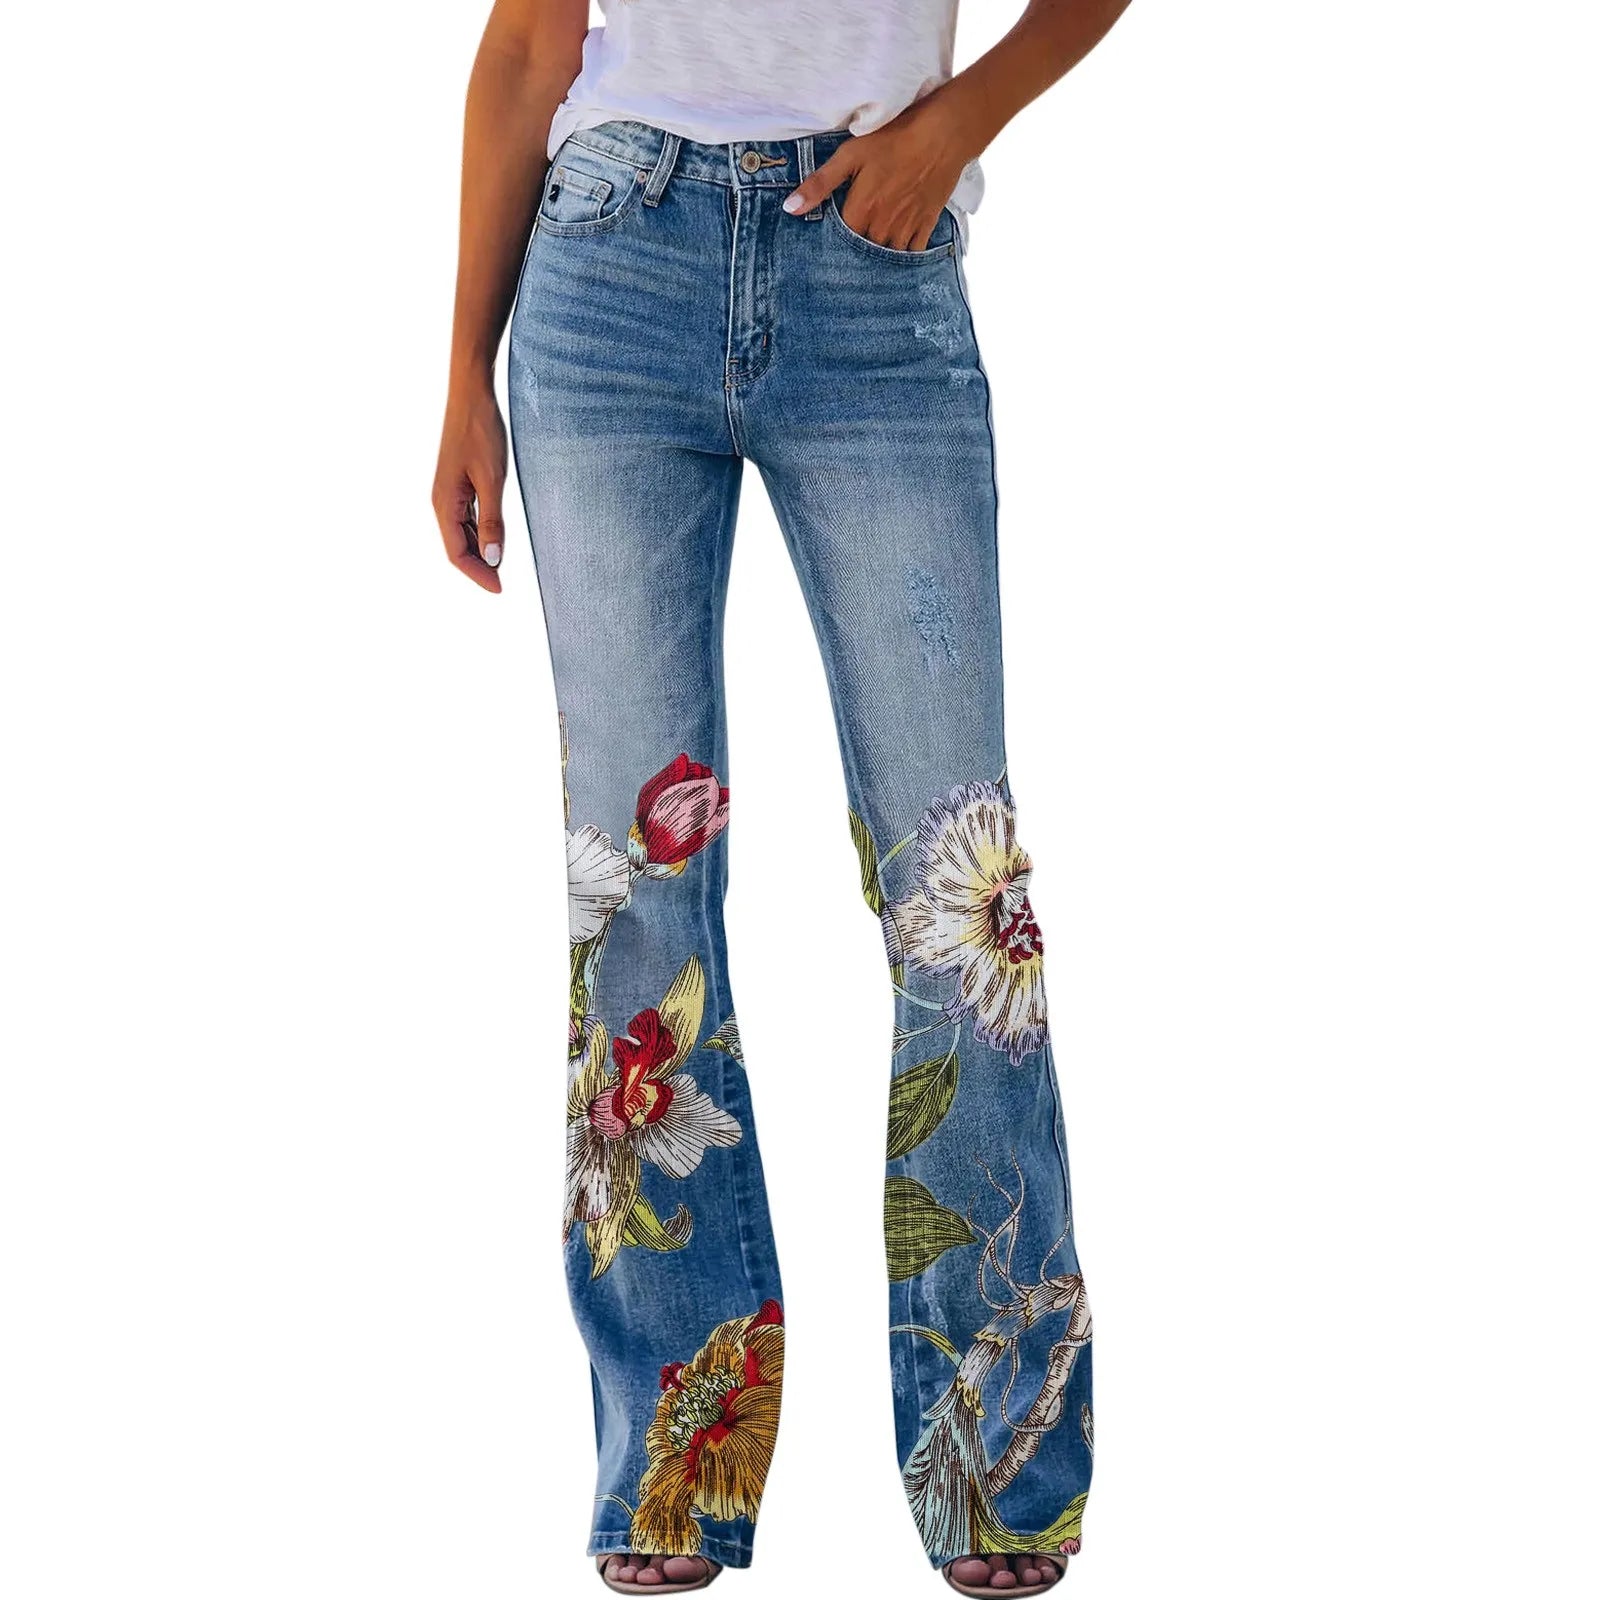 New Floral Printed Loose Flared Pants for Women Jeans Stretch Harajuku